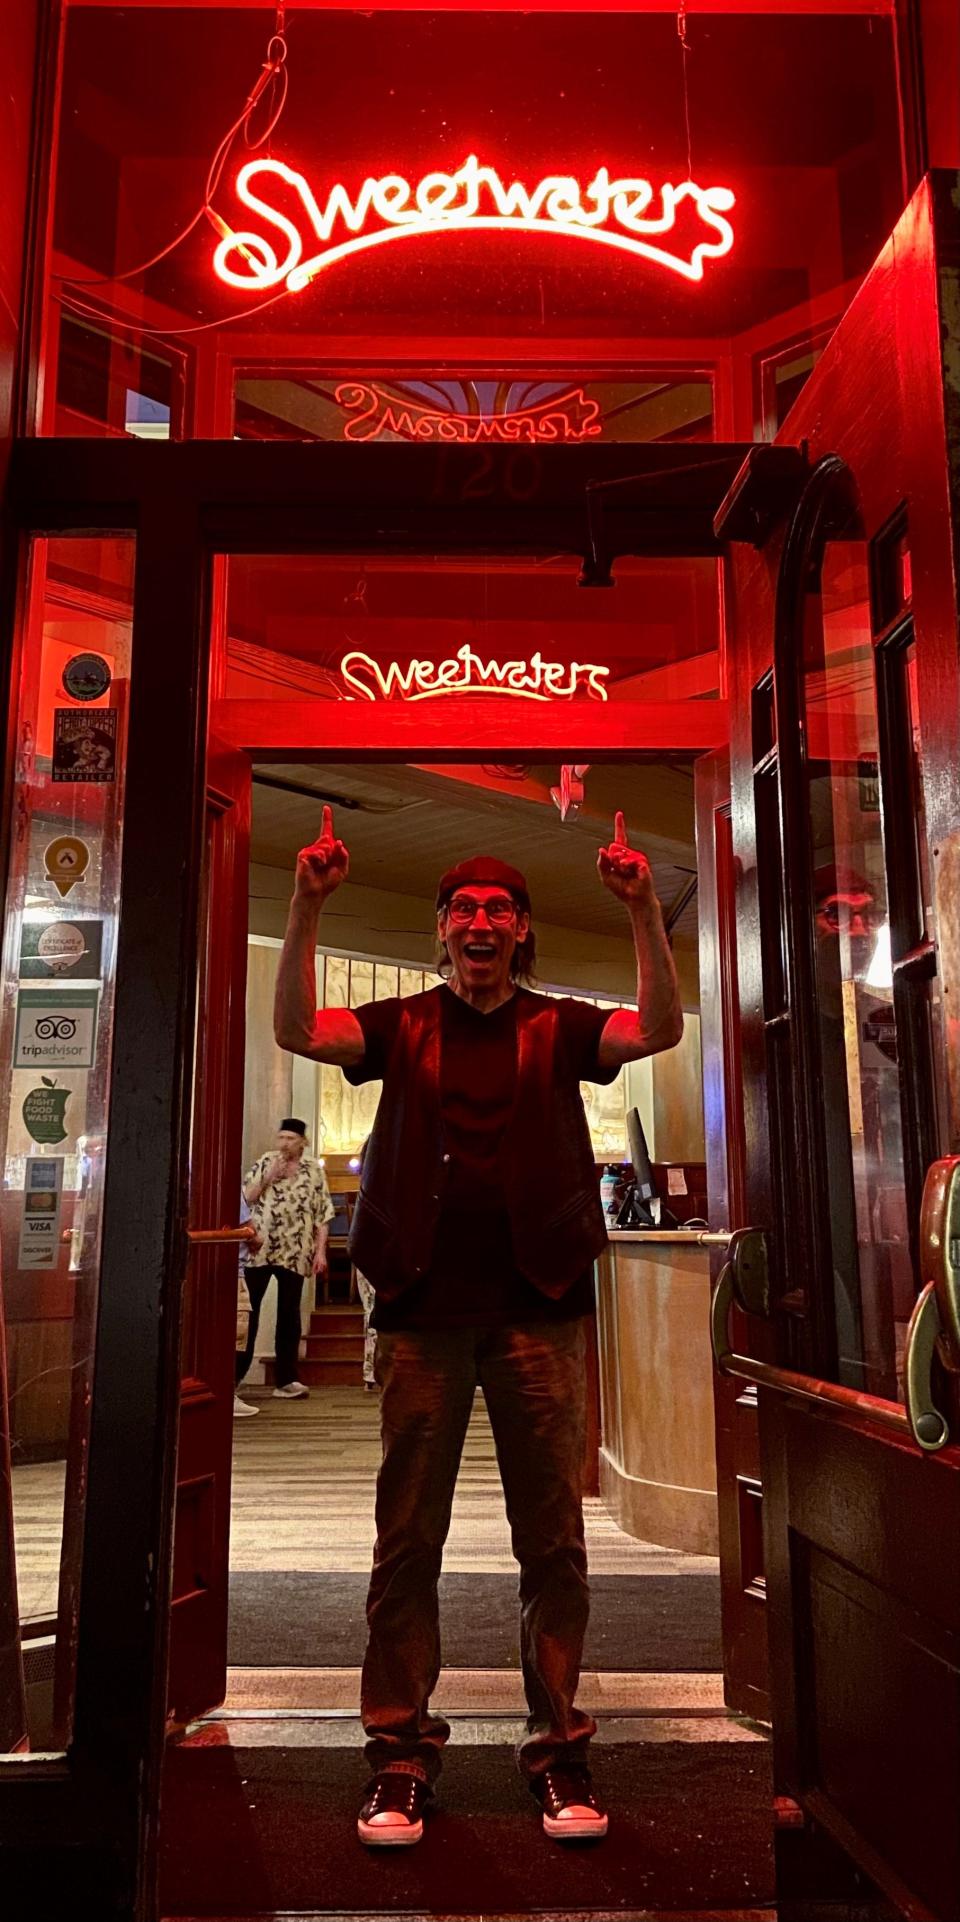 Former South Burlington resident Martin Guigui, writer and director of the film "Sweetwater," stands in June 2022 beneath a sign for the similarly-named, now-closed restaurant on Church Street in Burlington.